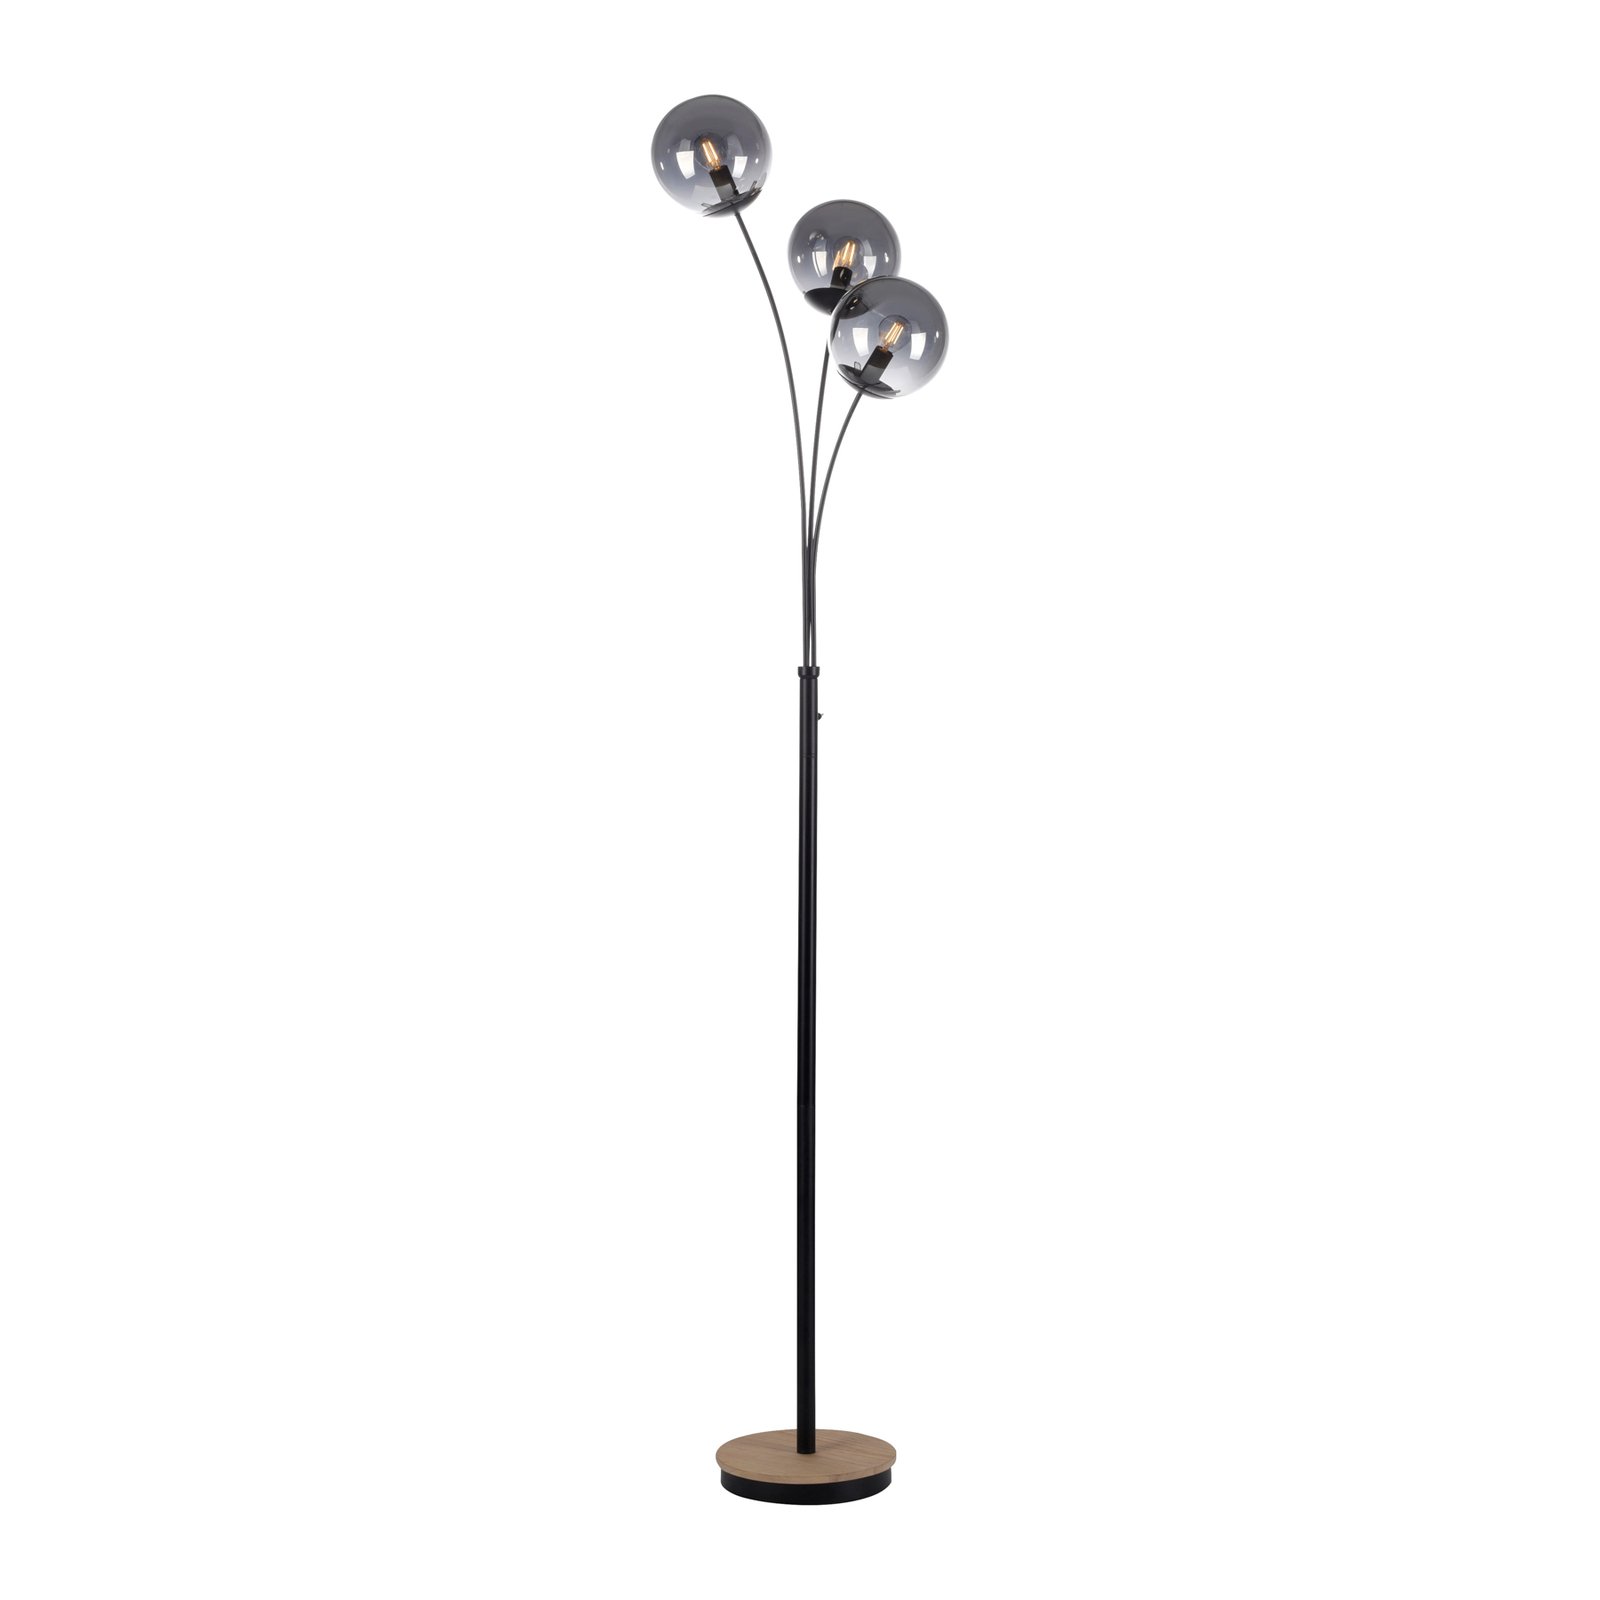 Green Widow floor lamp with glass shades